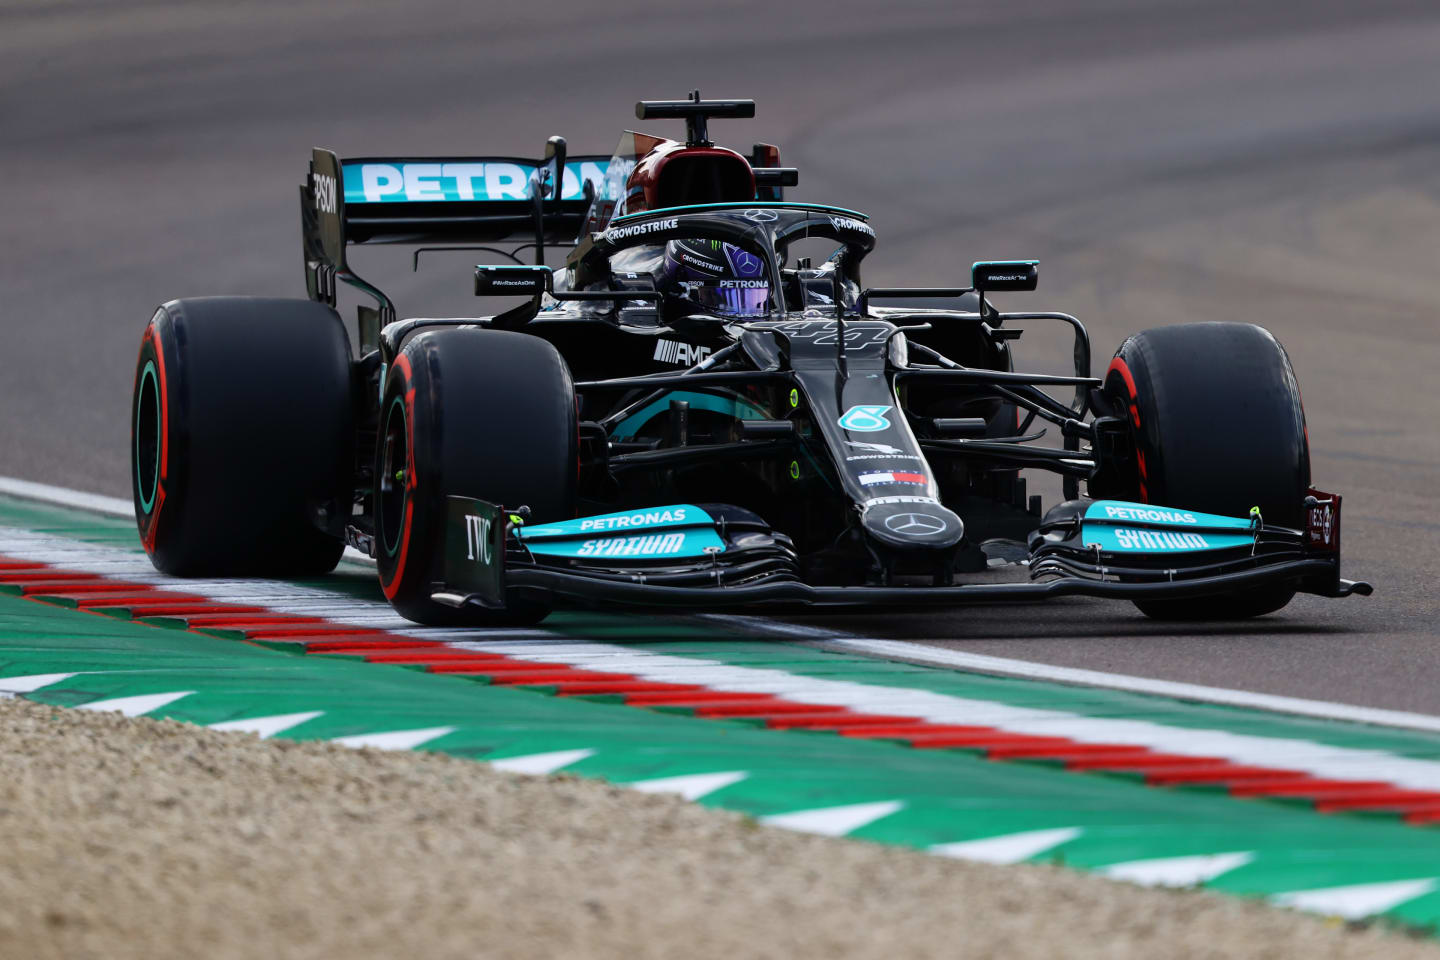 IMOLA, ITALY - APRIL 17: Lewis Hamilton of Great Britain driving the (44) Mercedes AMG Petronas F1 Team Mercedes W12 on track during qualifying ahead of the F1 Grand Prix of Emilia Romagna at Autodromo Enzo e Dino Ferrari on April 17, 2021 in Imola, Italy. (Photo by Bryn Lennon/Getty Images)